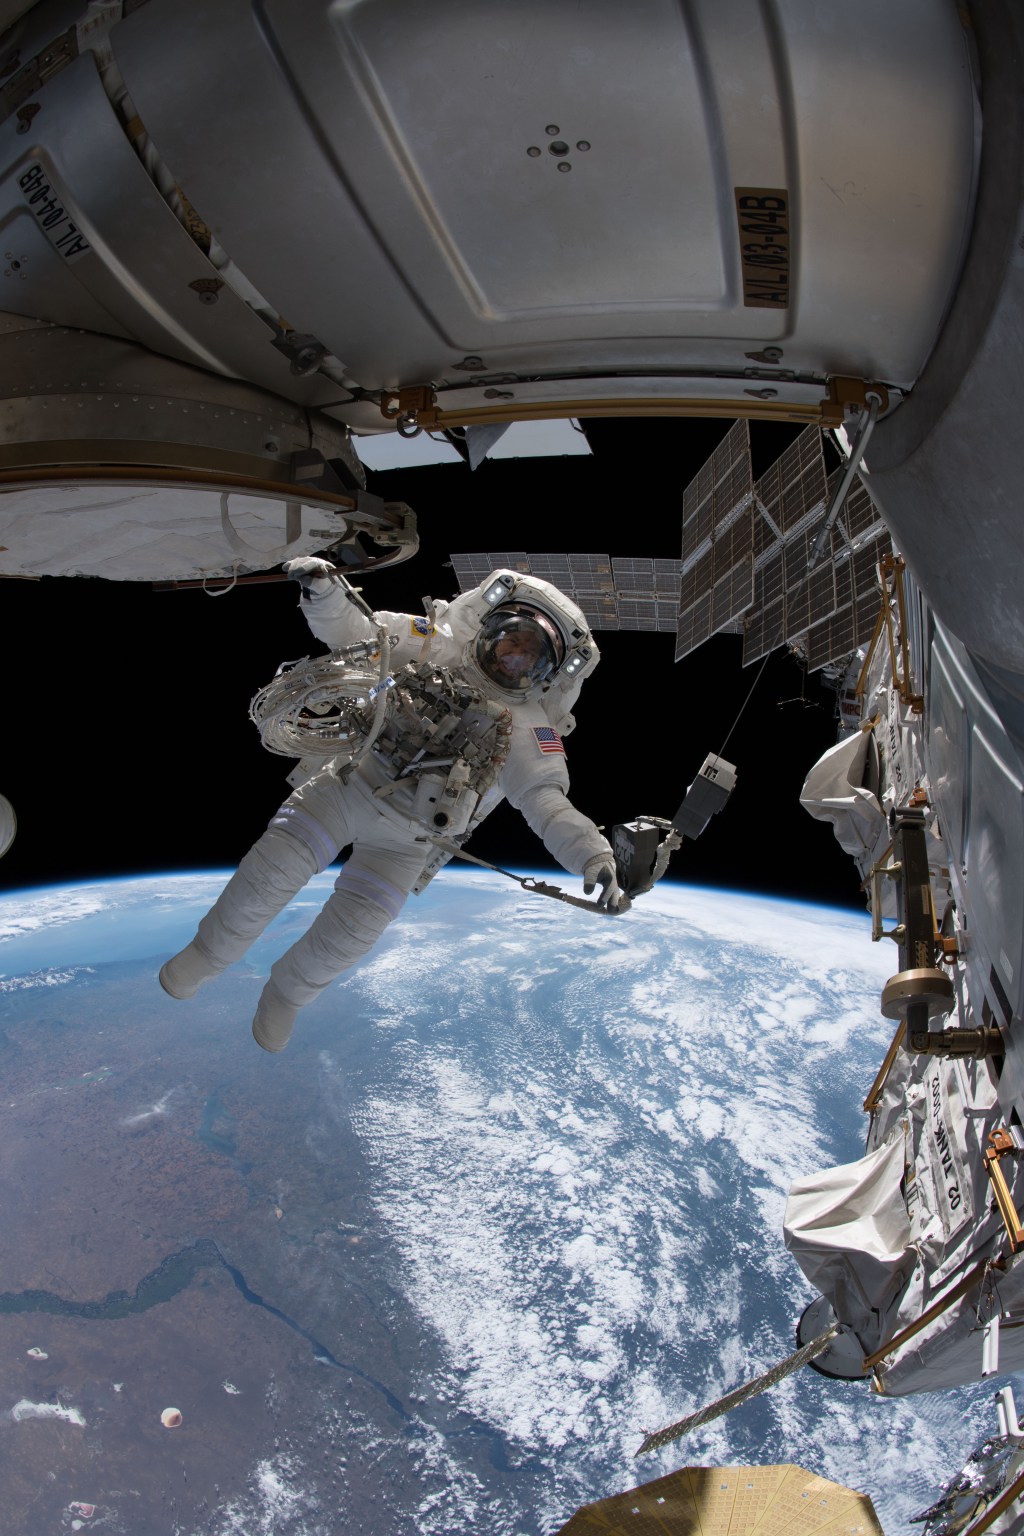 NASA astronaut Drew Feustel is pictured tethered to the International Space Station just outside of the Quest airlock during a spacewalk he conducted with fellow NASA astronaut Ricky Arnold (out of frame) on June 14, 2018.